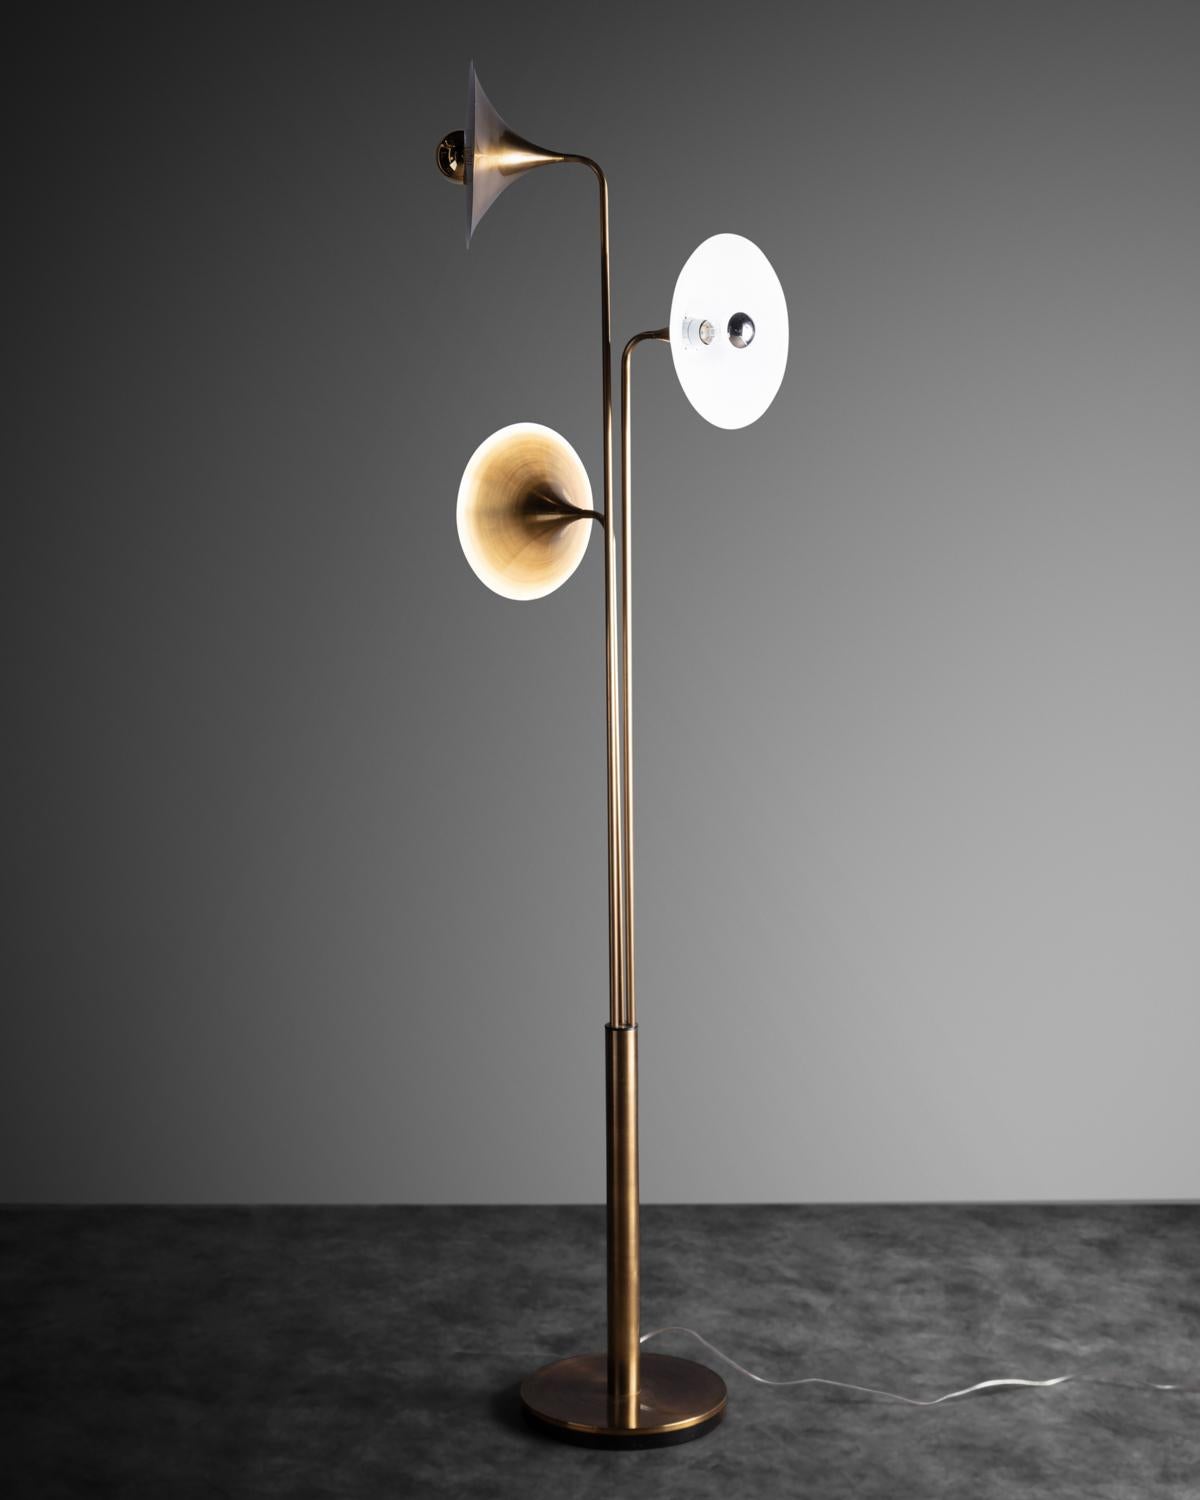 Spun brass lamp, with a central stem issuing three adjustable trumpet-like shades.